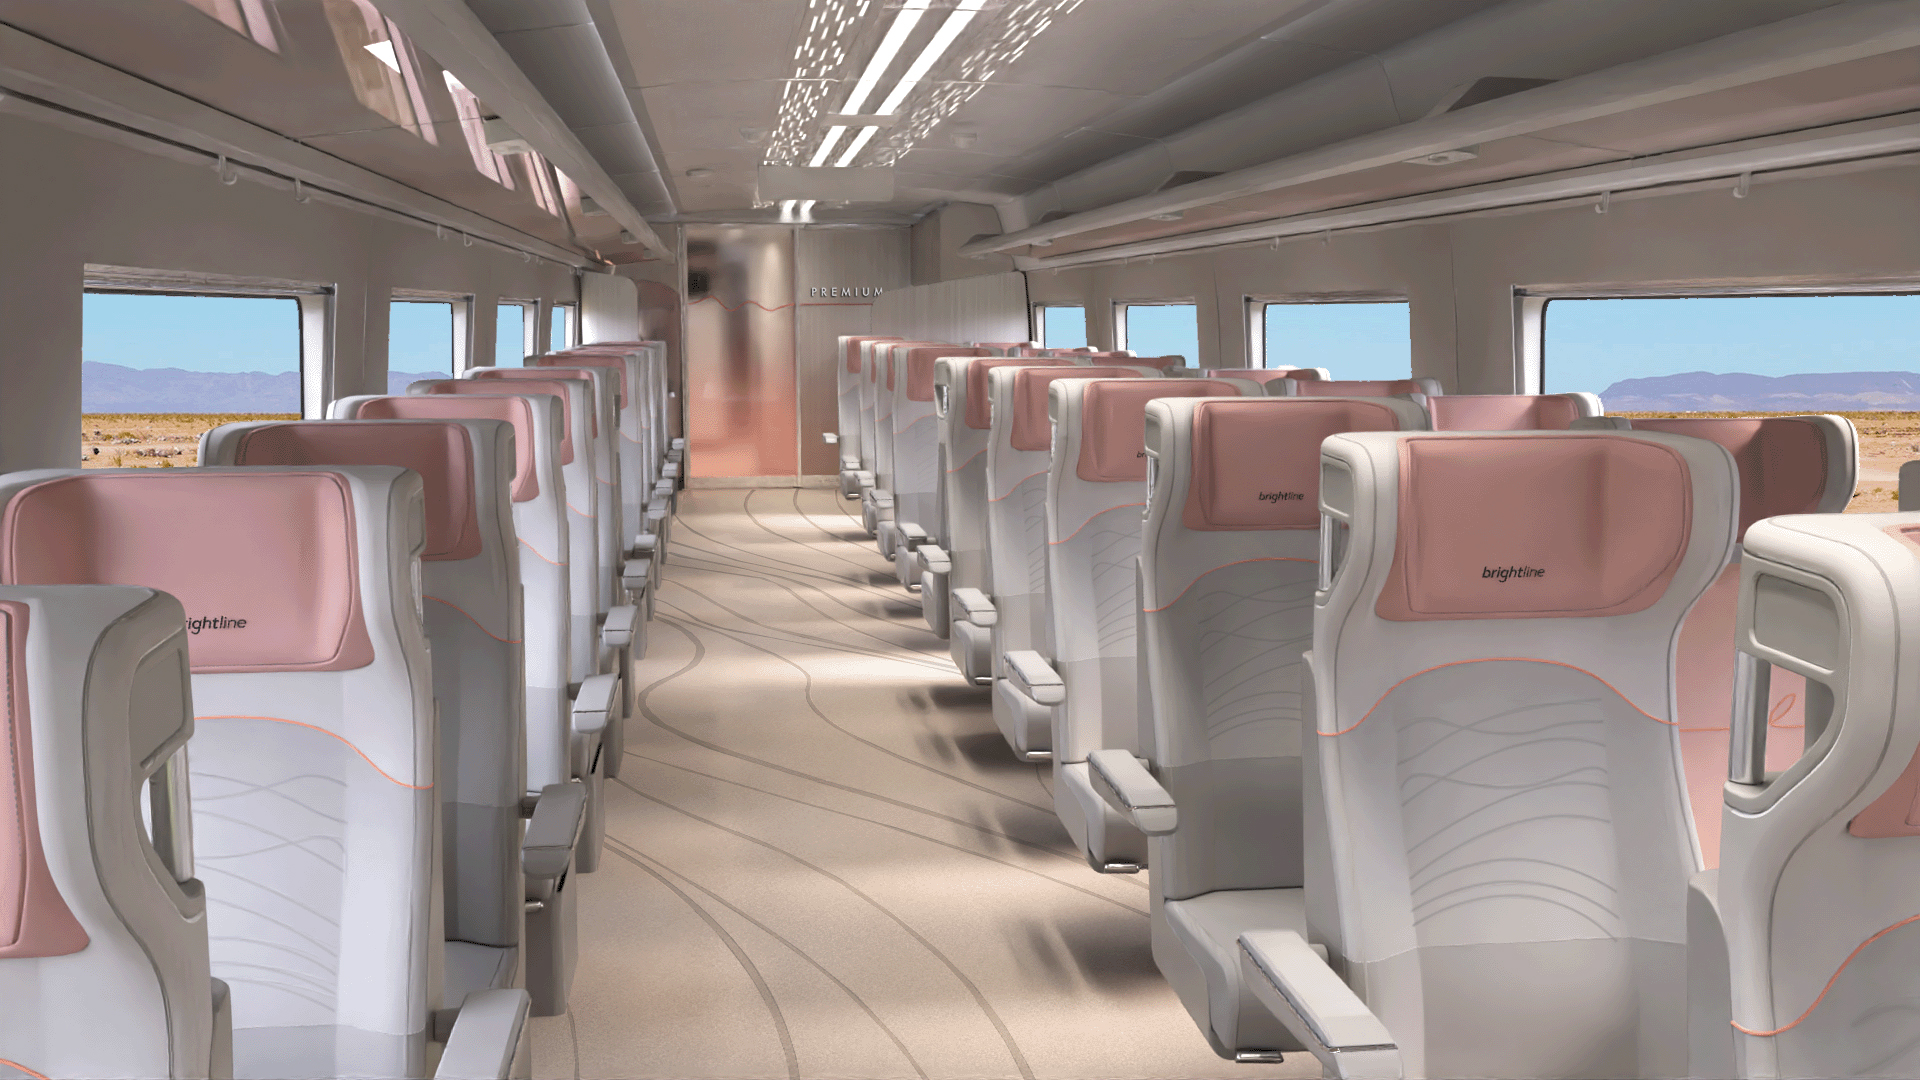 A rendering depicting seating inside the future Brightline West trains